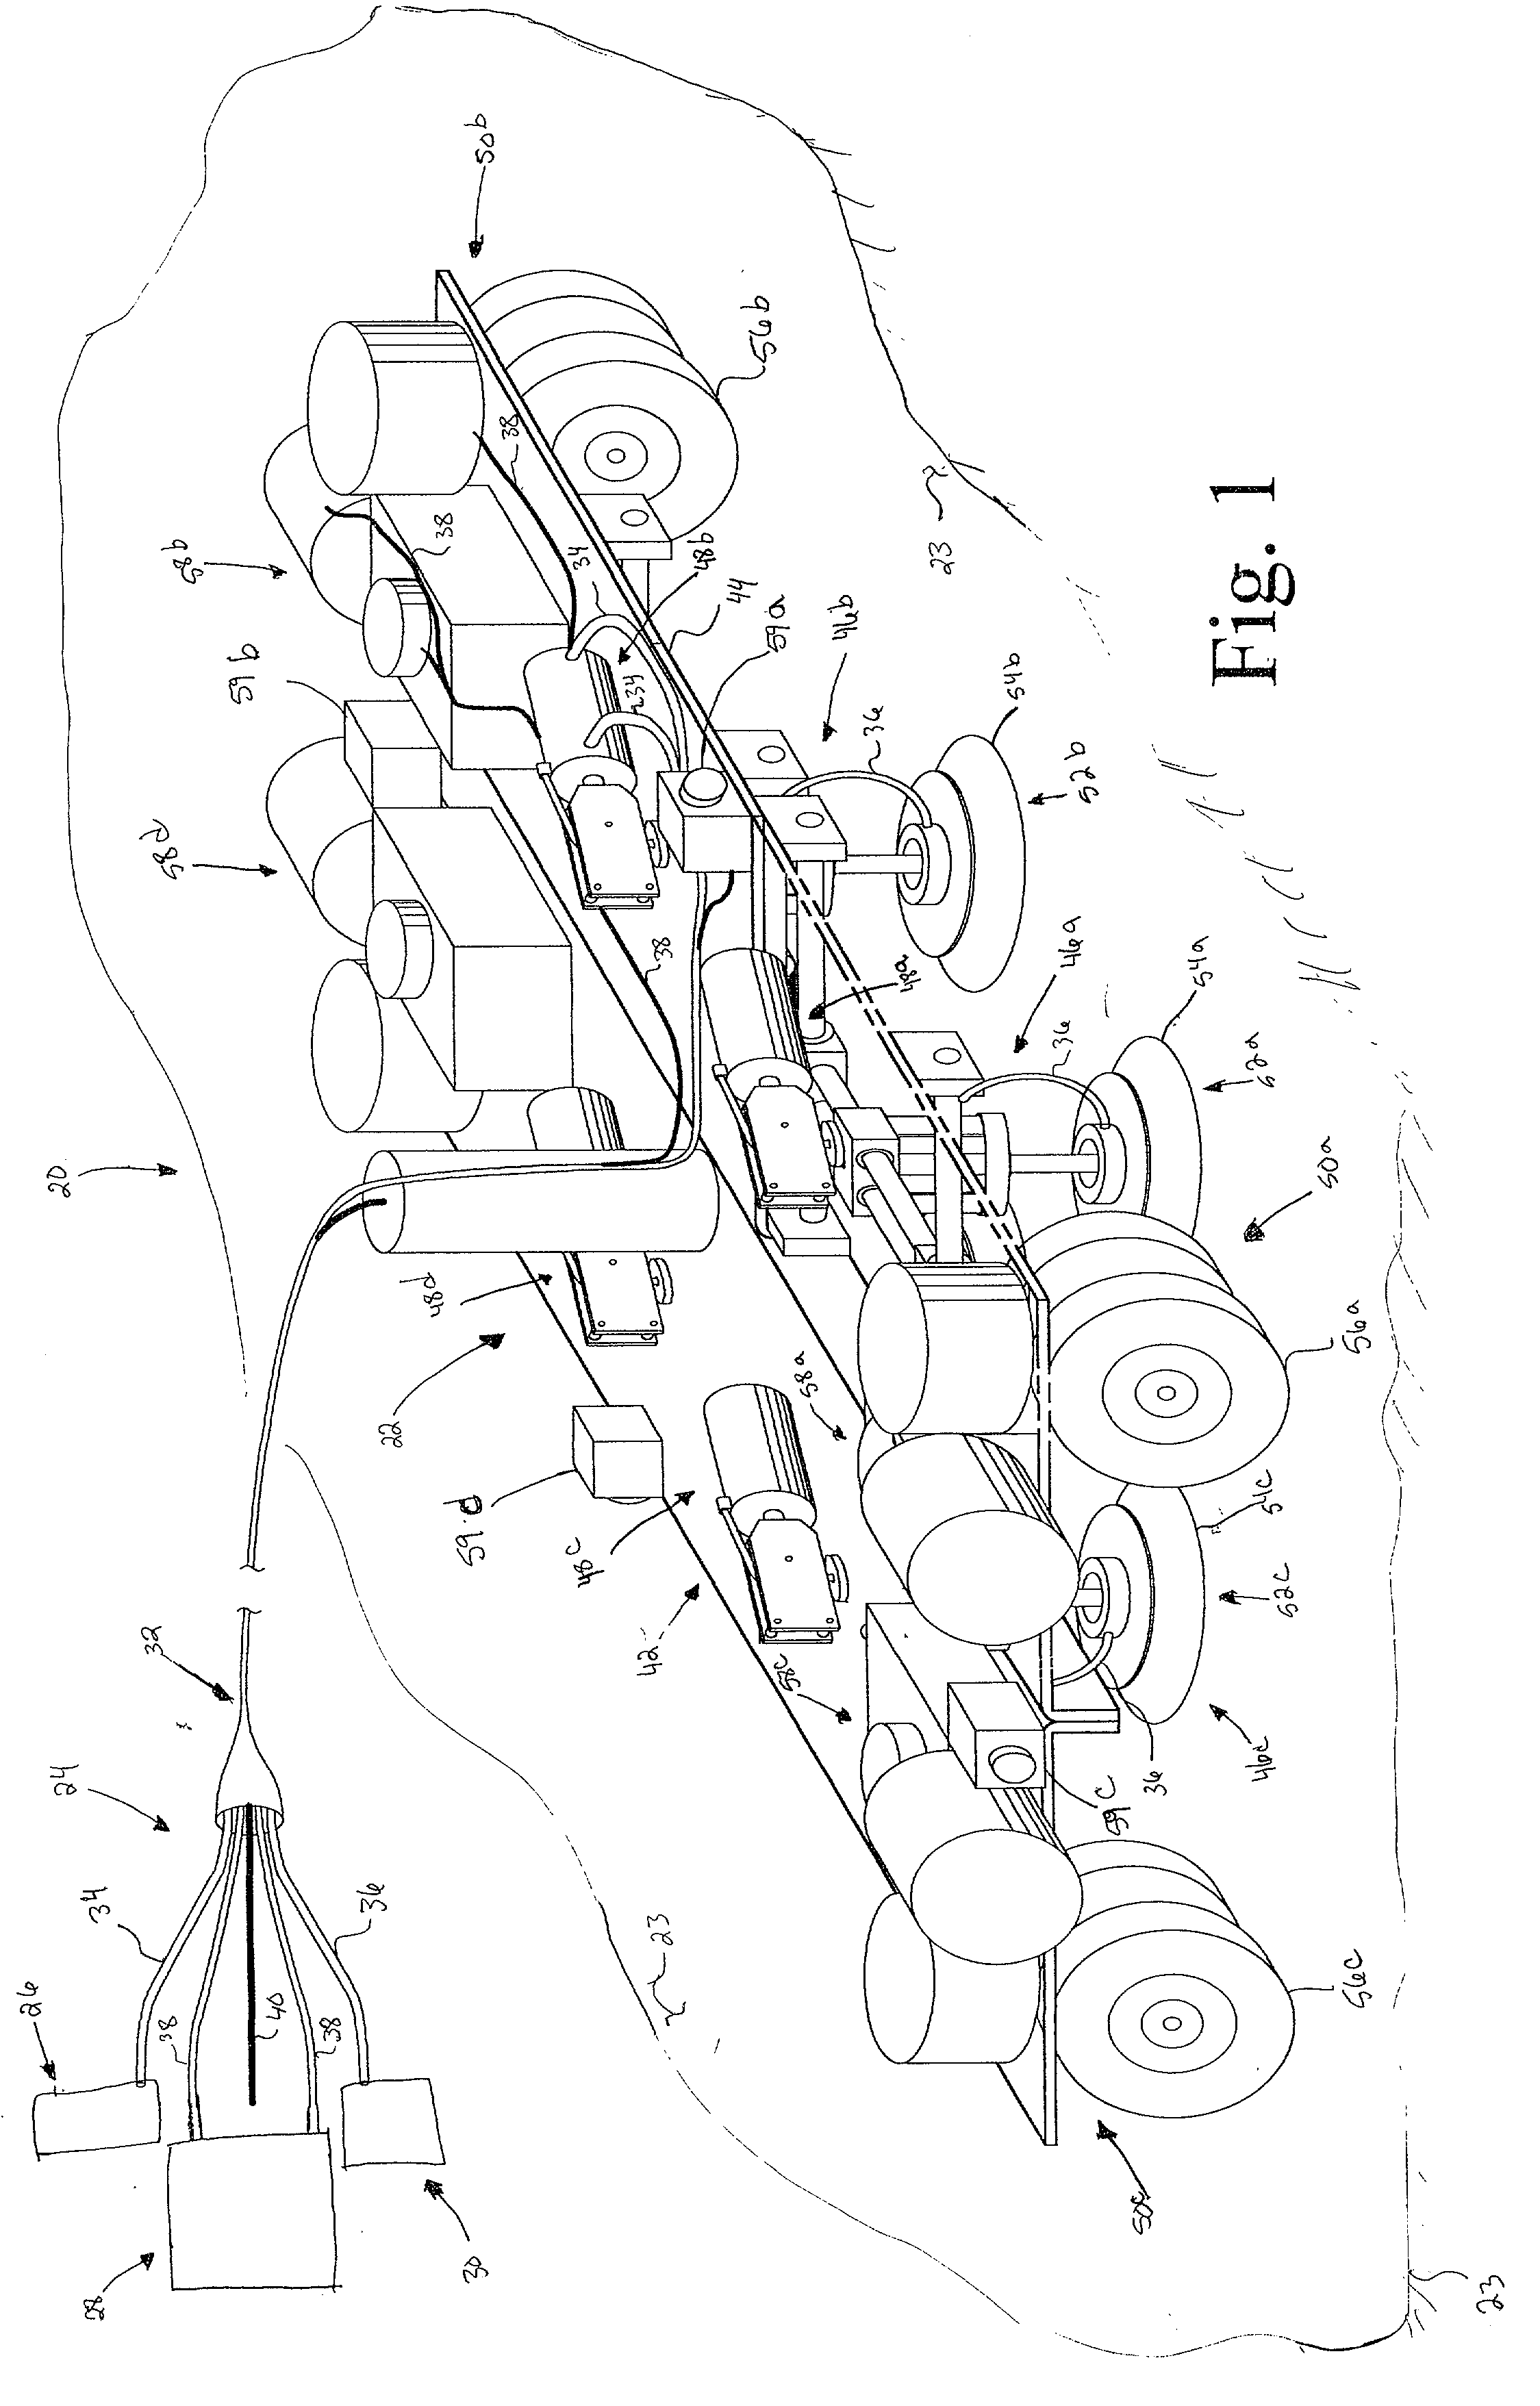 Apparatus and method for traversing compound curved and other surfaces